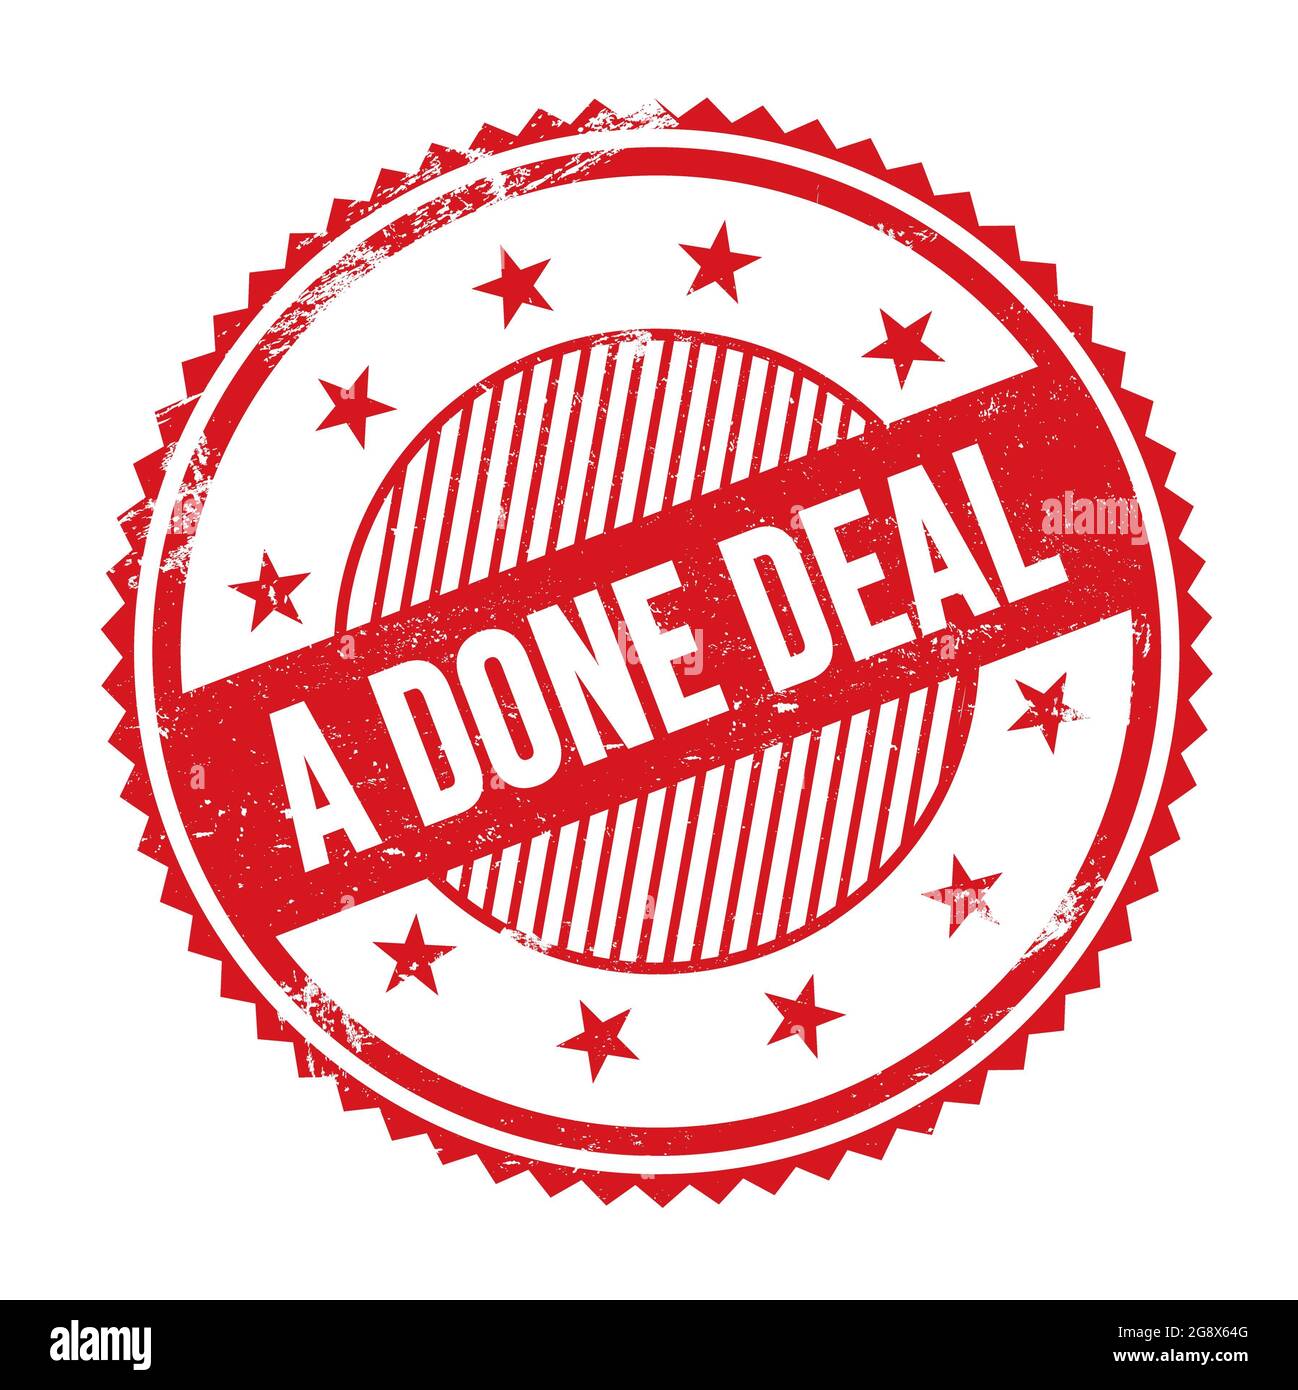 A DONE DEAL text written on red grungy zig zag borders round stamp. Stock Photo